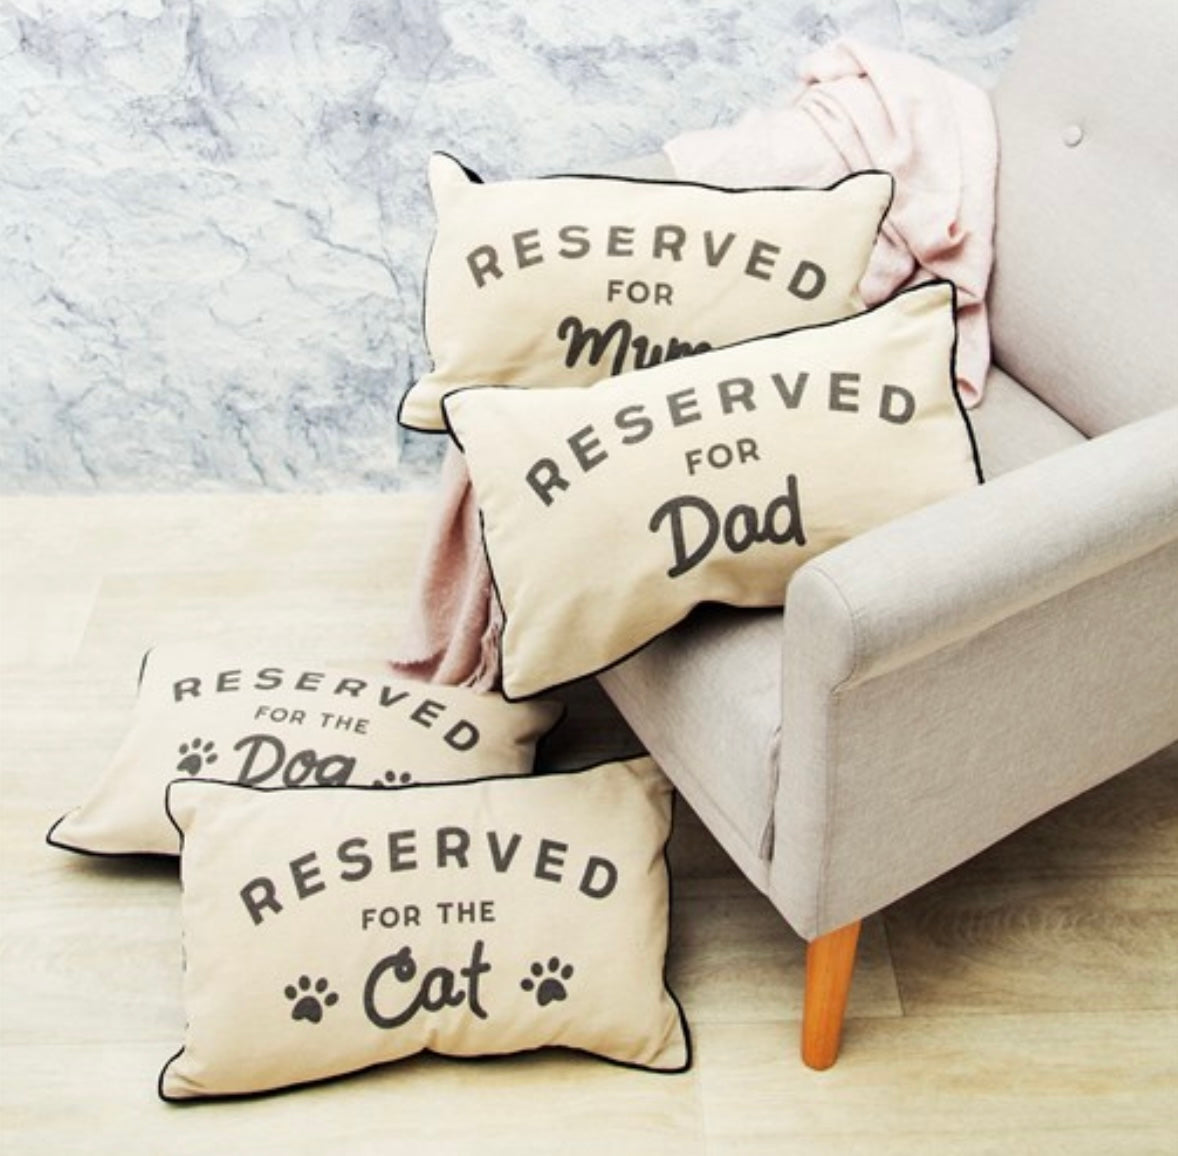 Reserved for the Cat Cushion